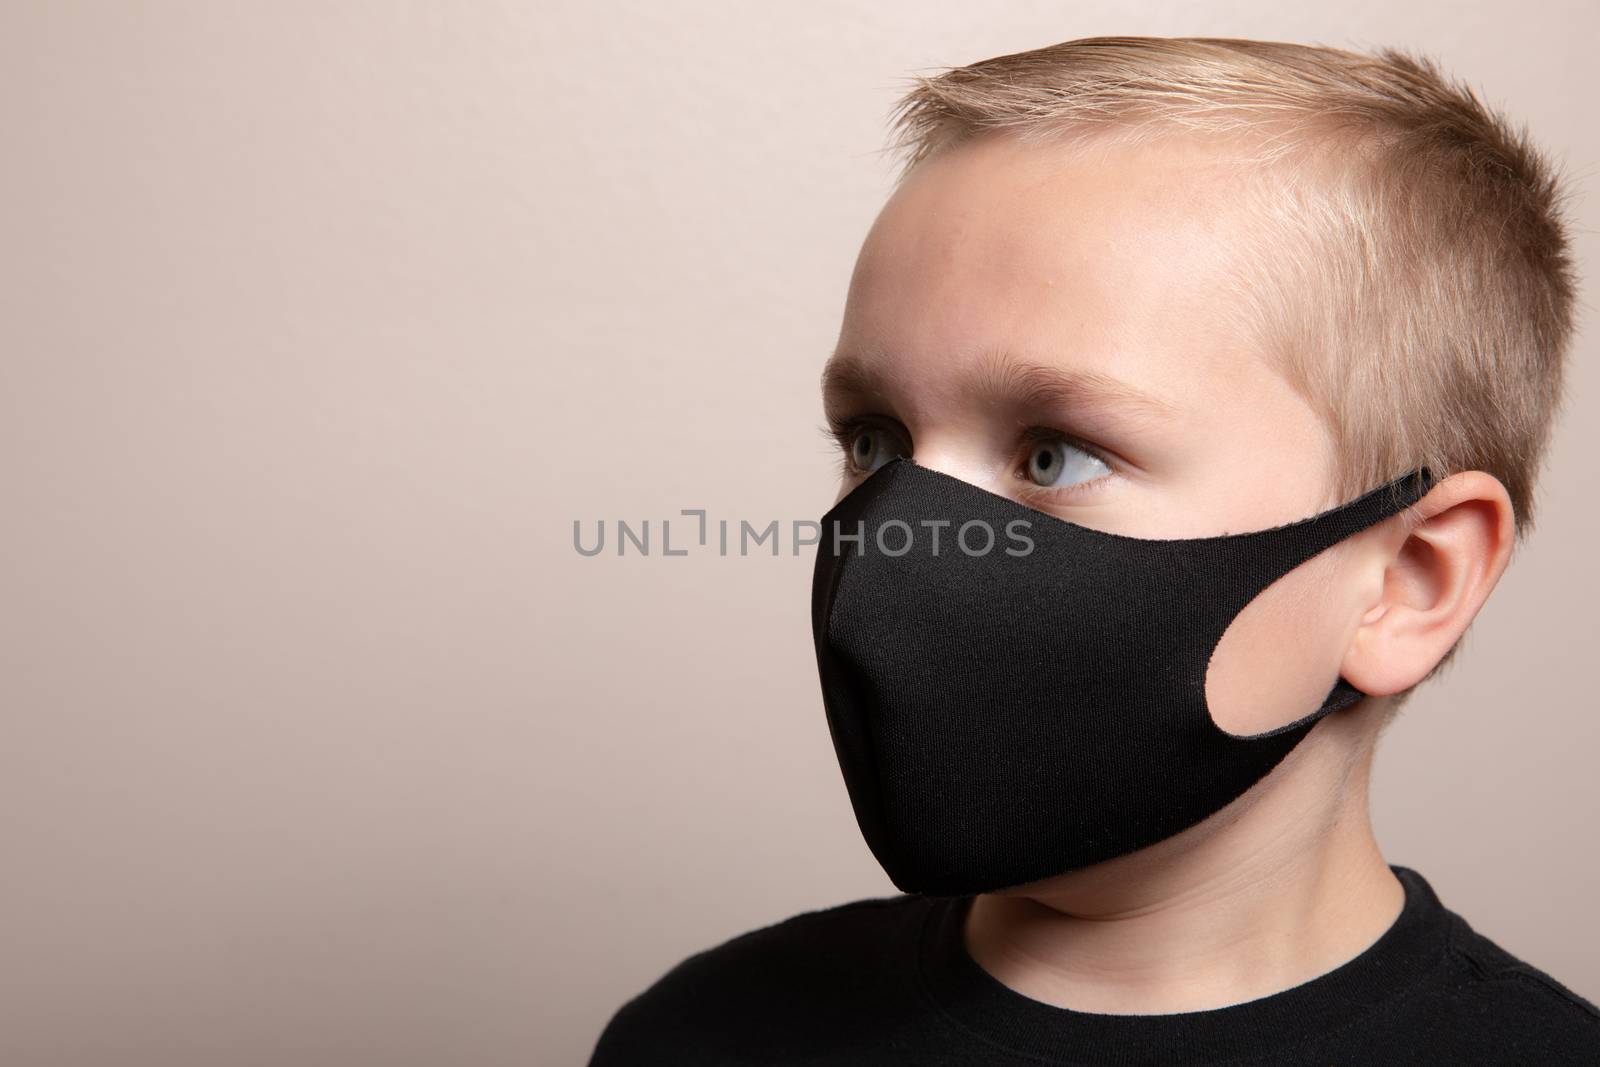 Young boy with a black face mask on trying to prevent the spread of germs